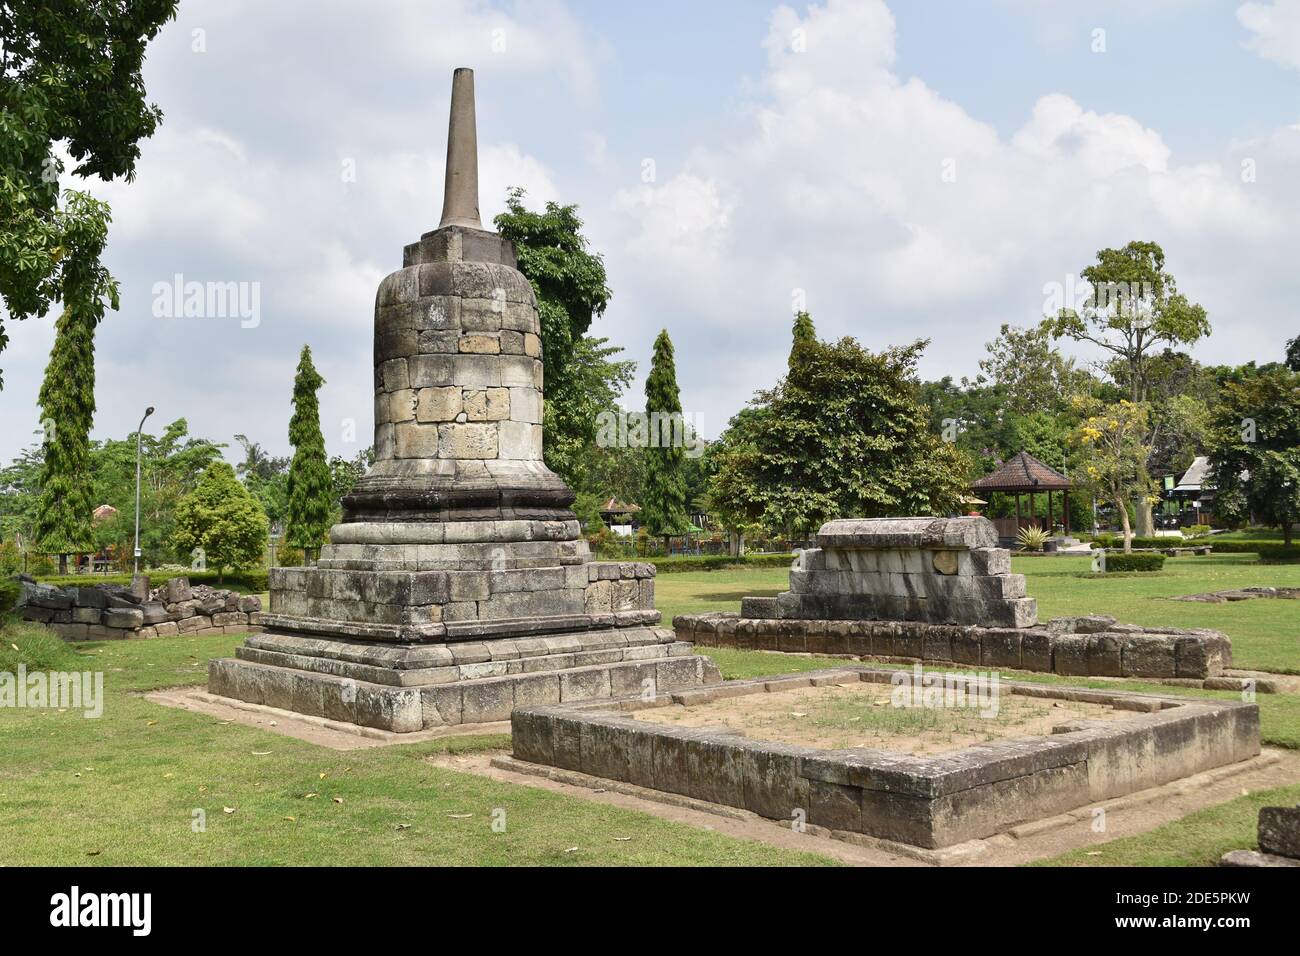 perwara or pervara stupa and others debris at Sojiwan Temple complex in Central Java, Indonesia Stock Photo